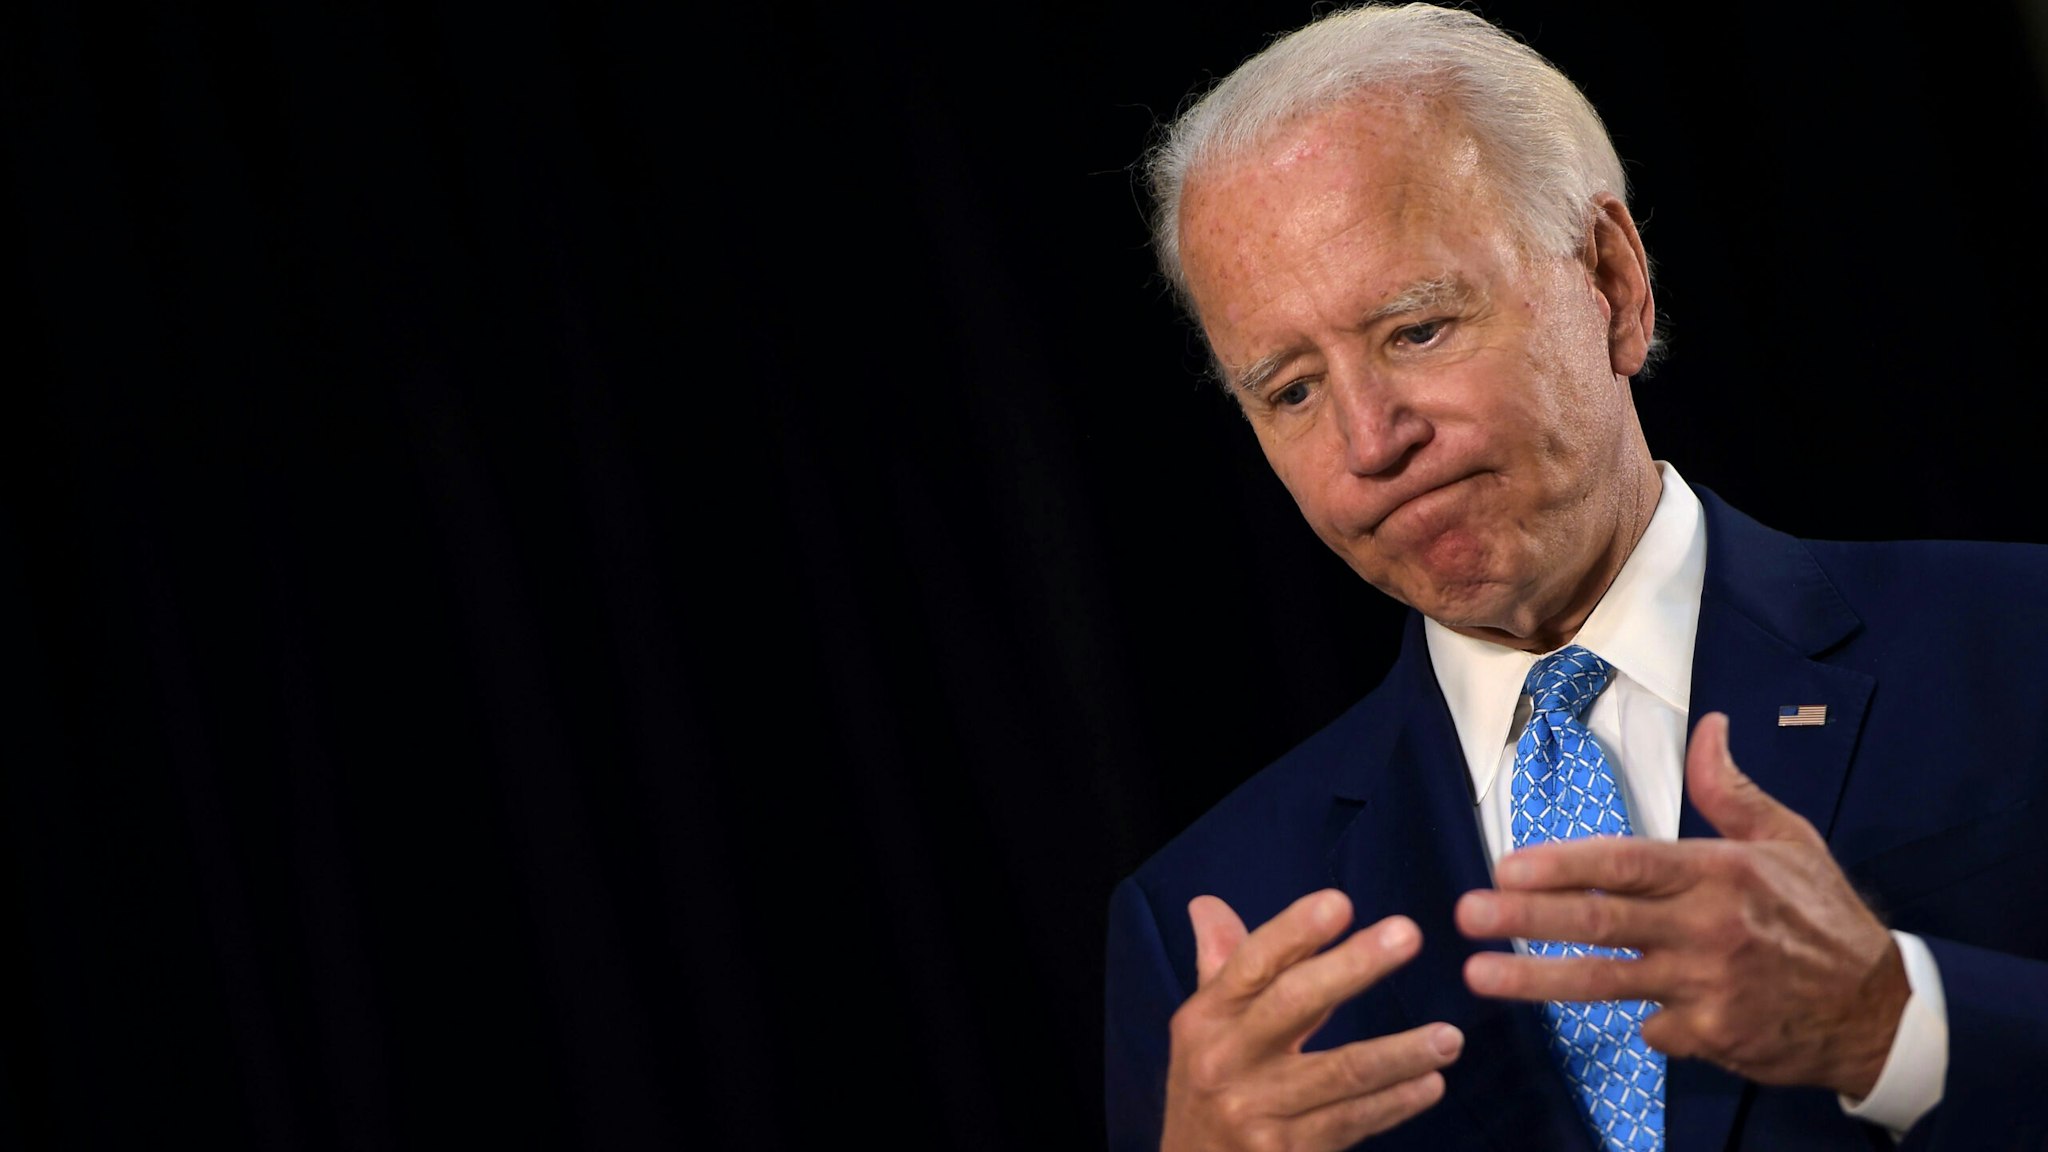 US Democratic presidential candidate Joe Biden answers questions after speaking about the coronavirus pandemic and the economy on June 30, 2020, in Wilmington, Delaware.